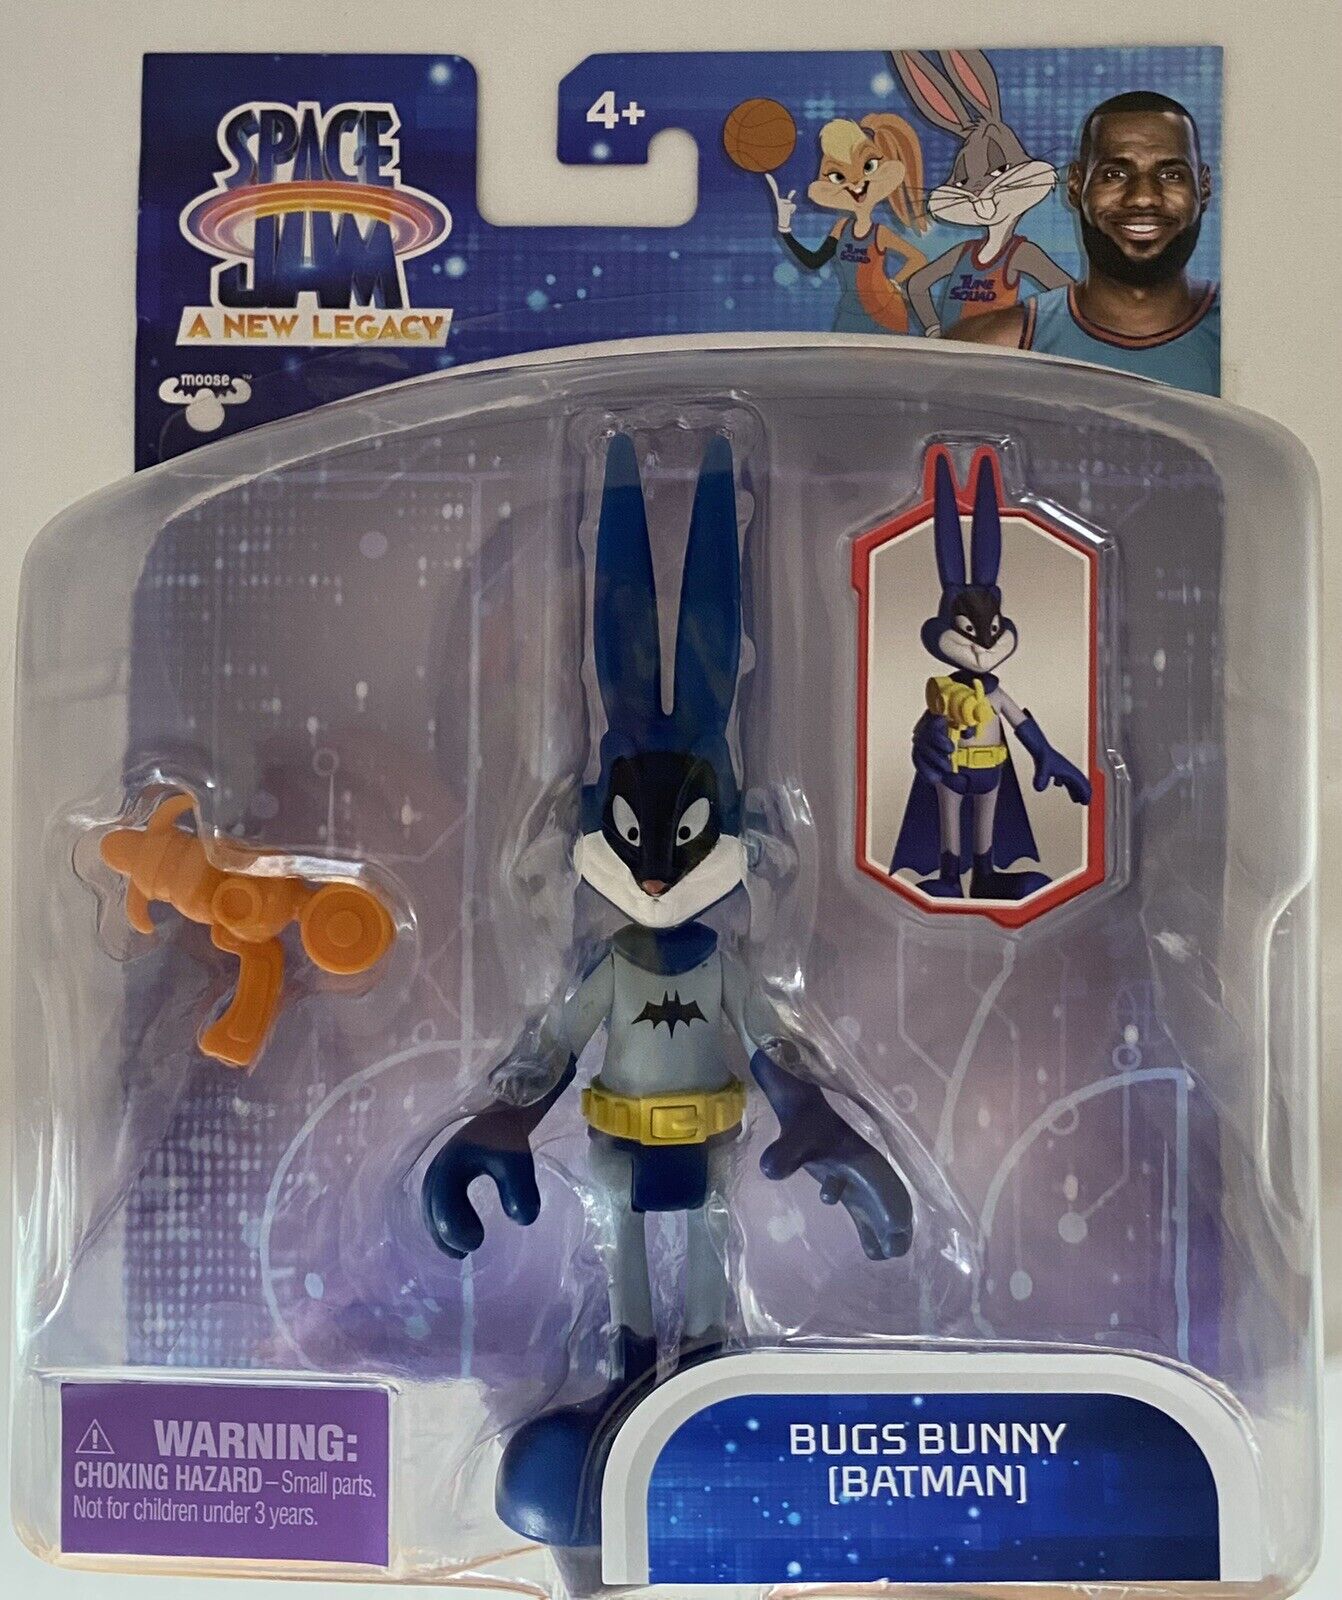 Space Jam A new Legacy - Bugs Bunny (Batman) Action Figure *NEW* Sealed |  eBay